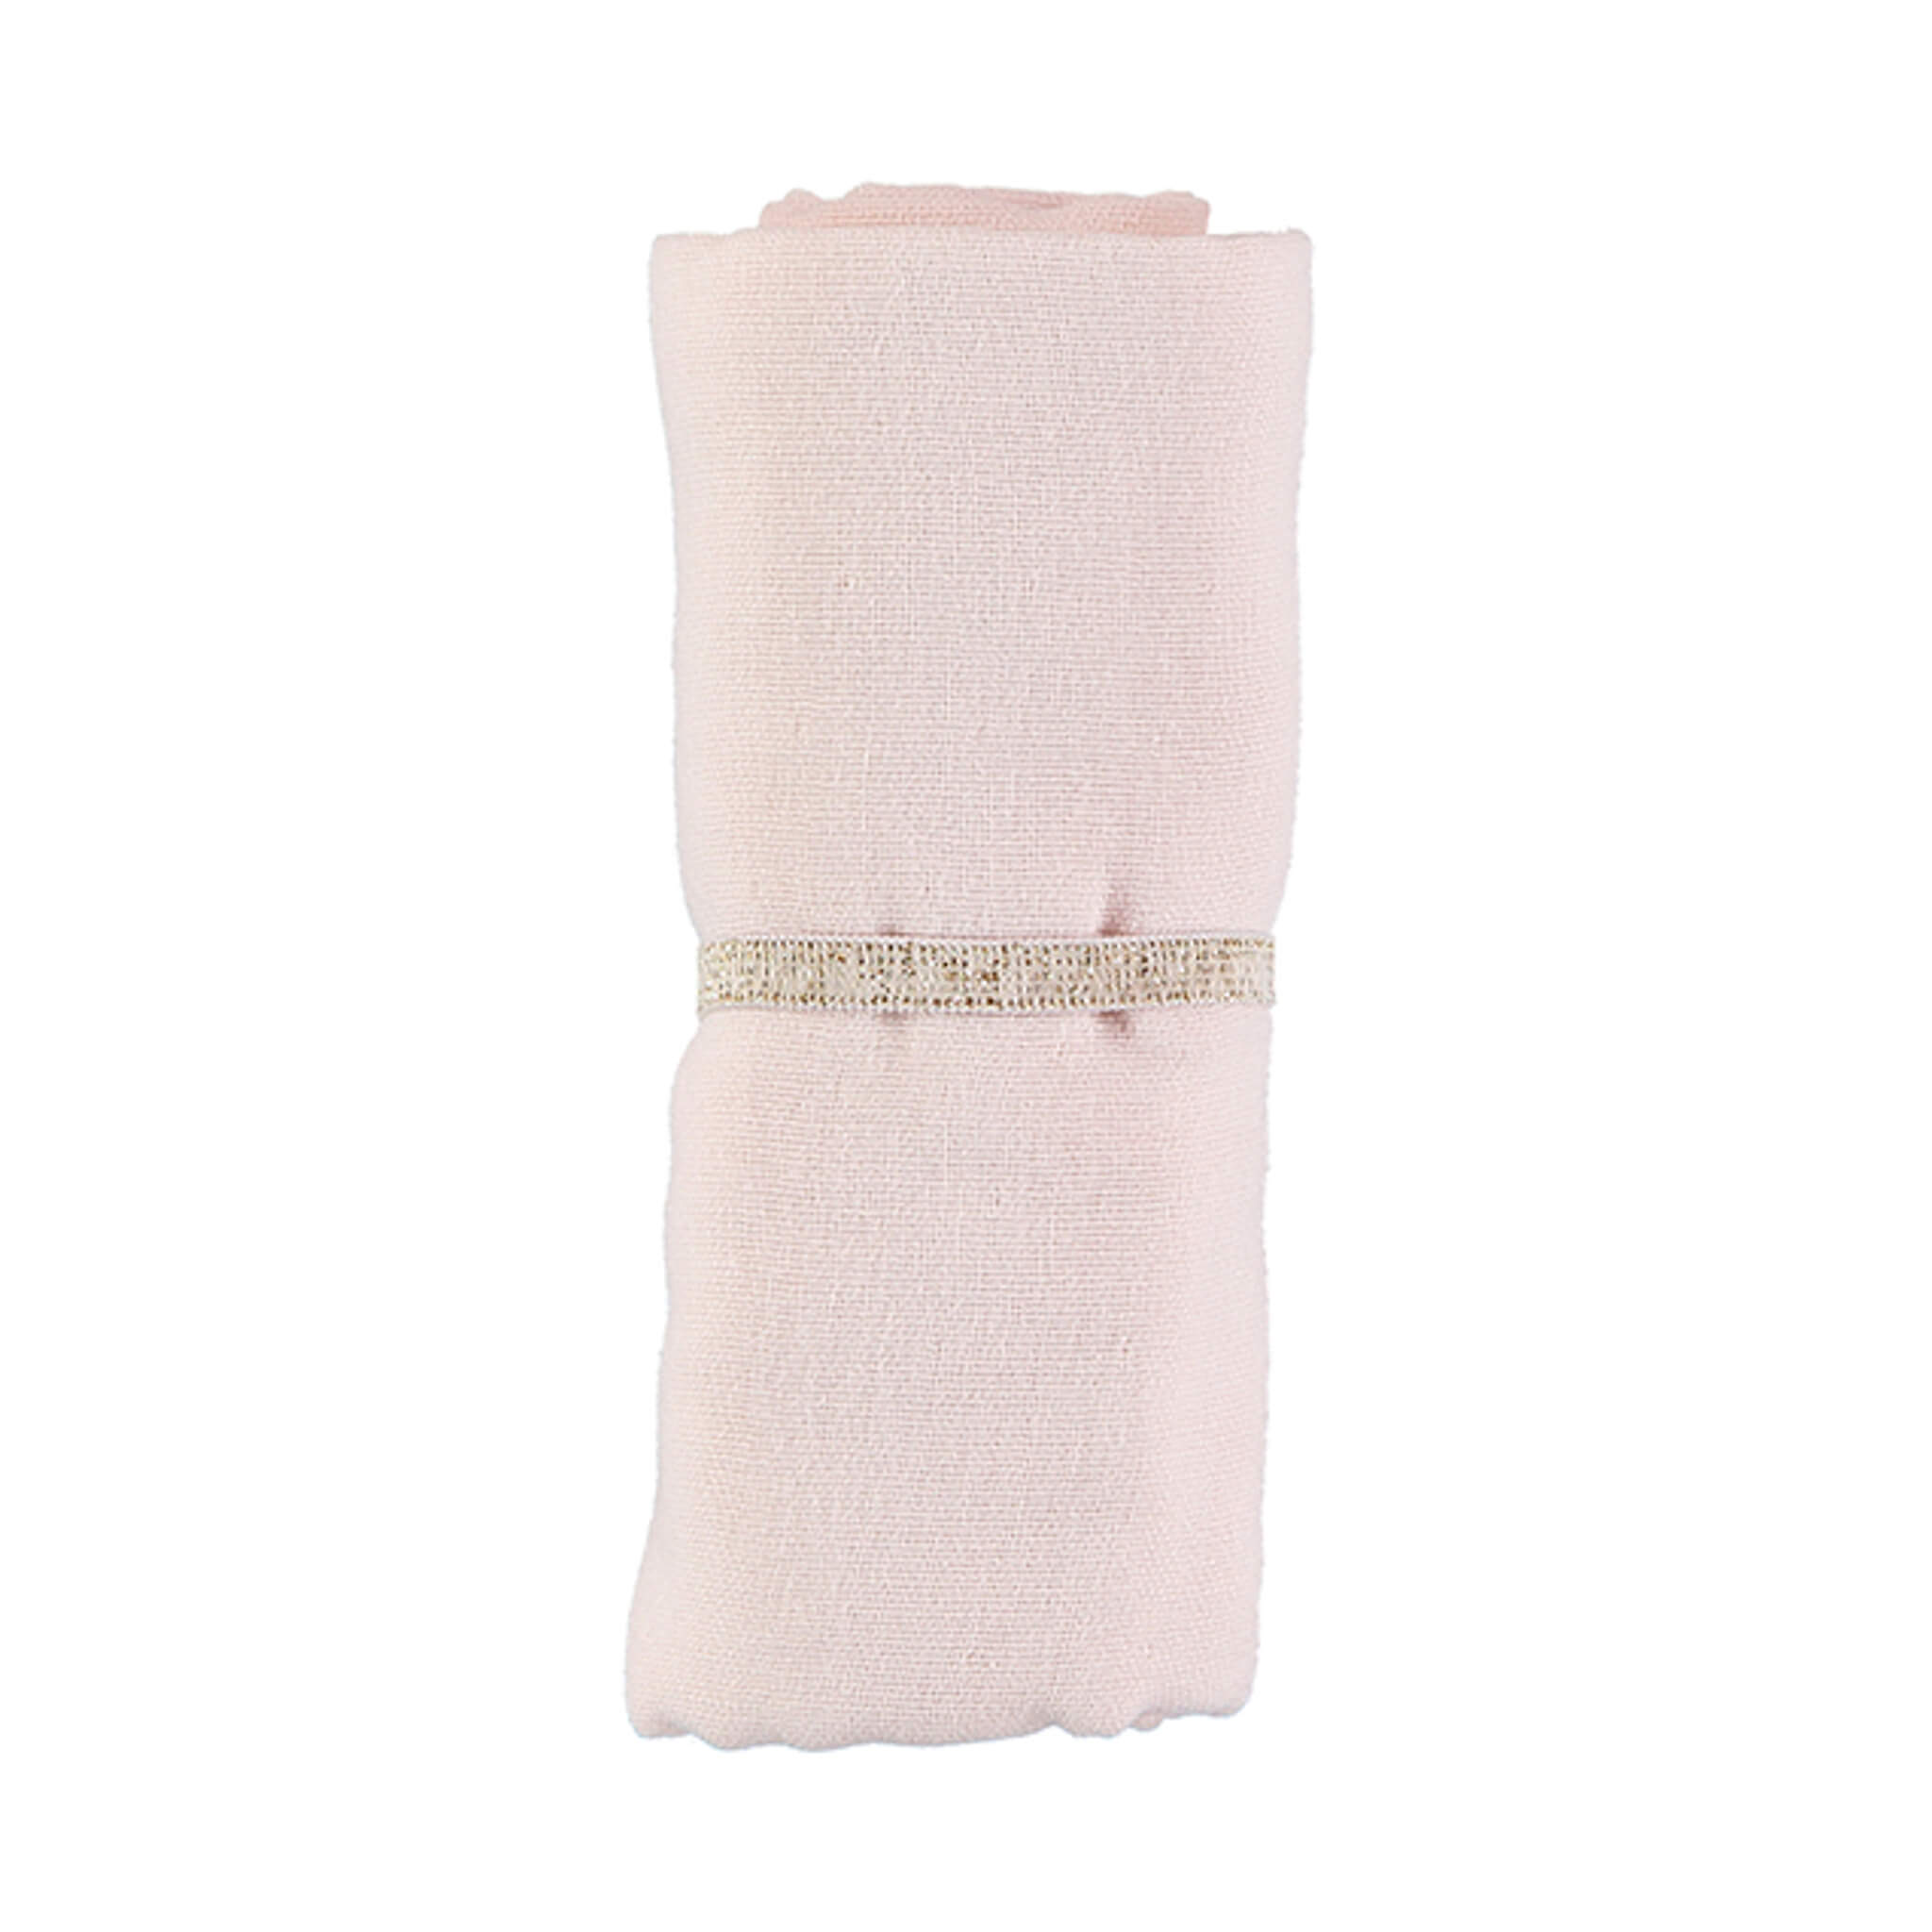 Nobodinoz Organic Butterfly Swaddle in Dream Pink